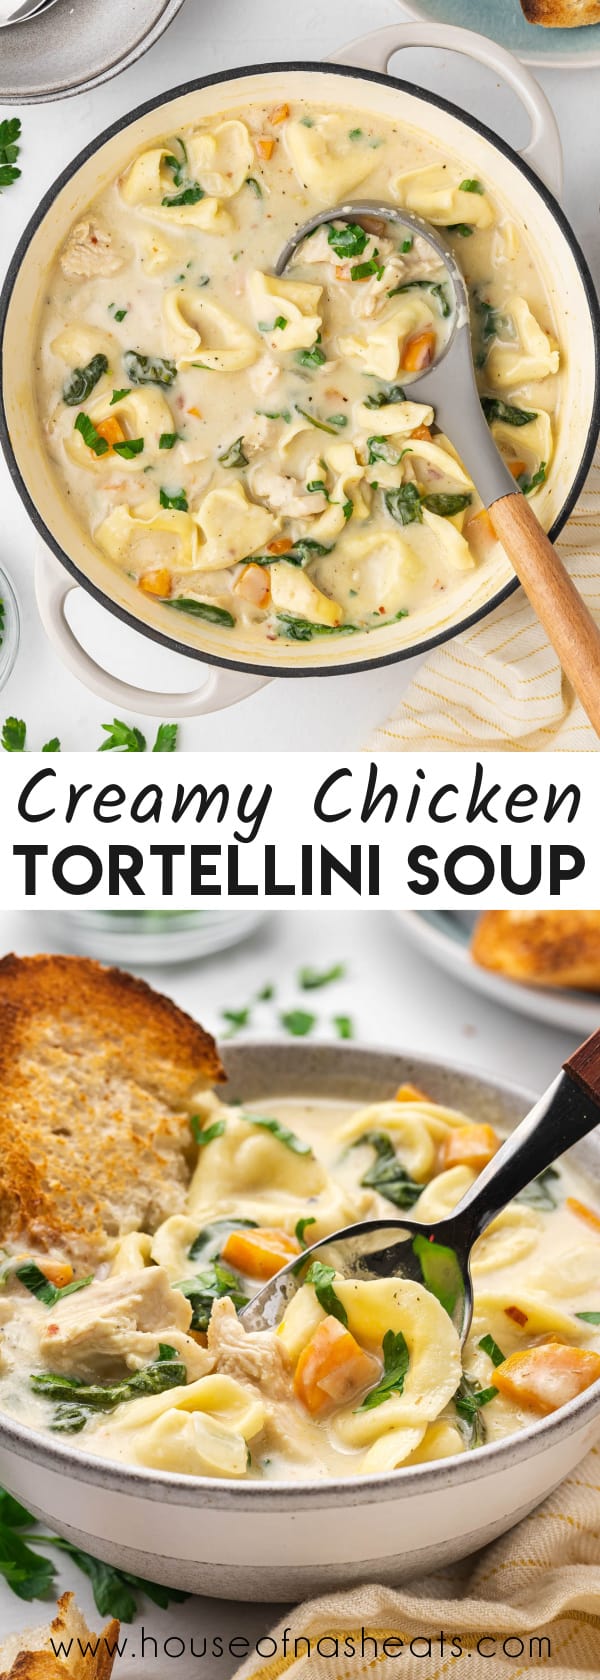 A collage of images of chicken tortellini soup with text overlay.